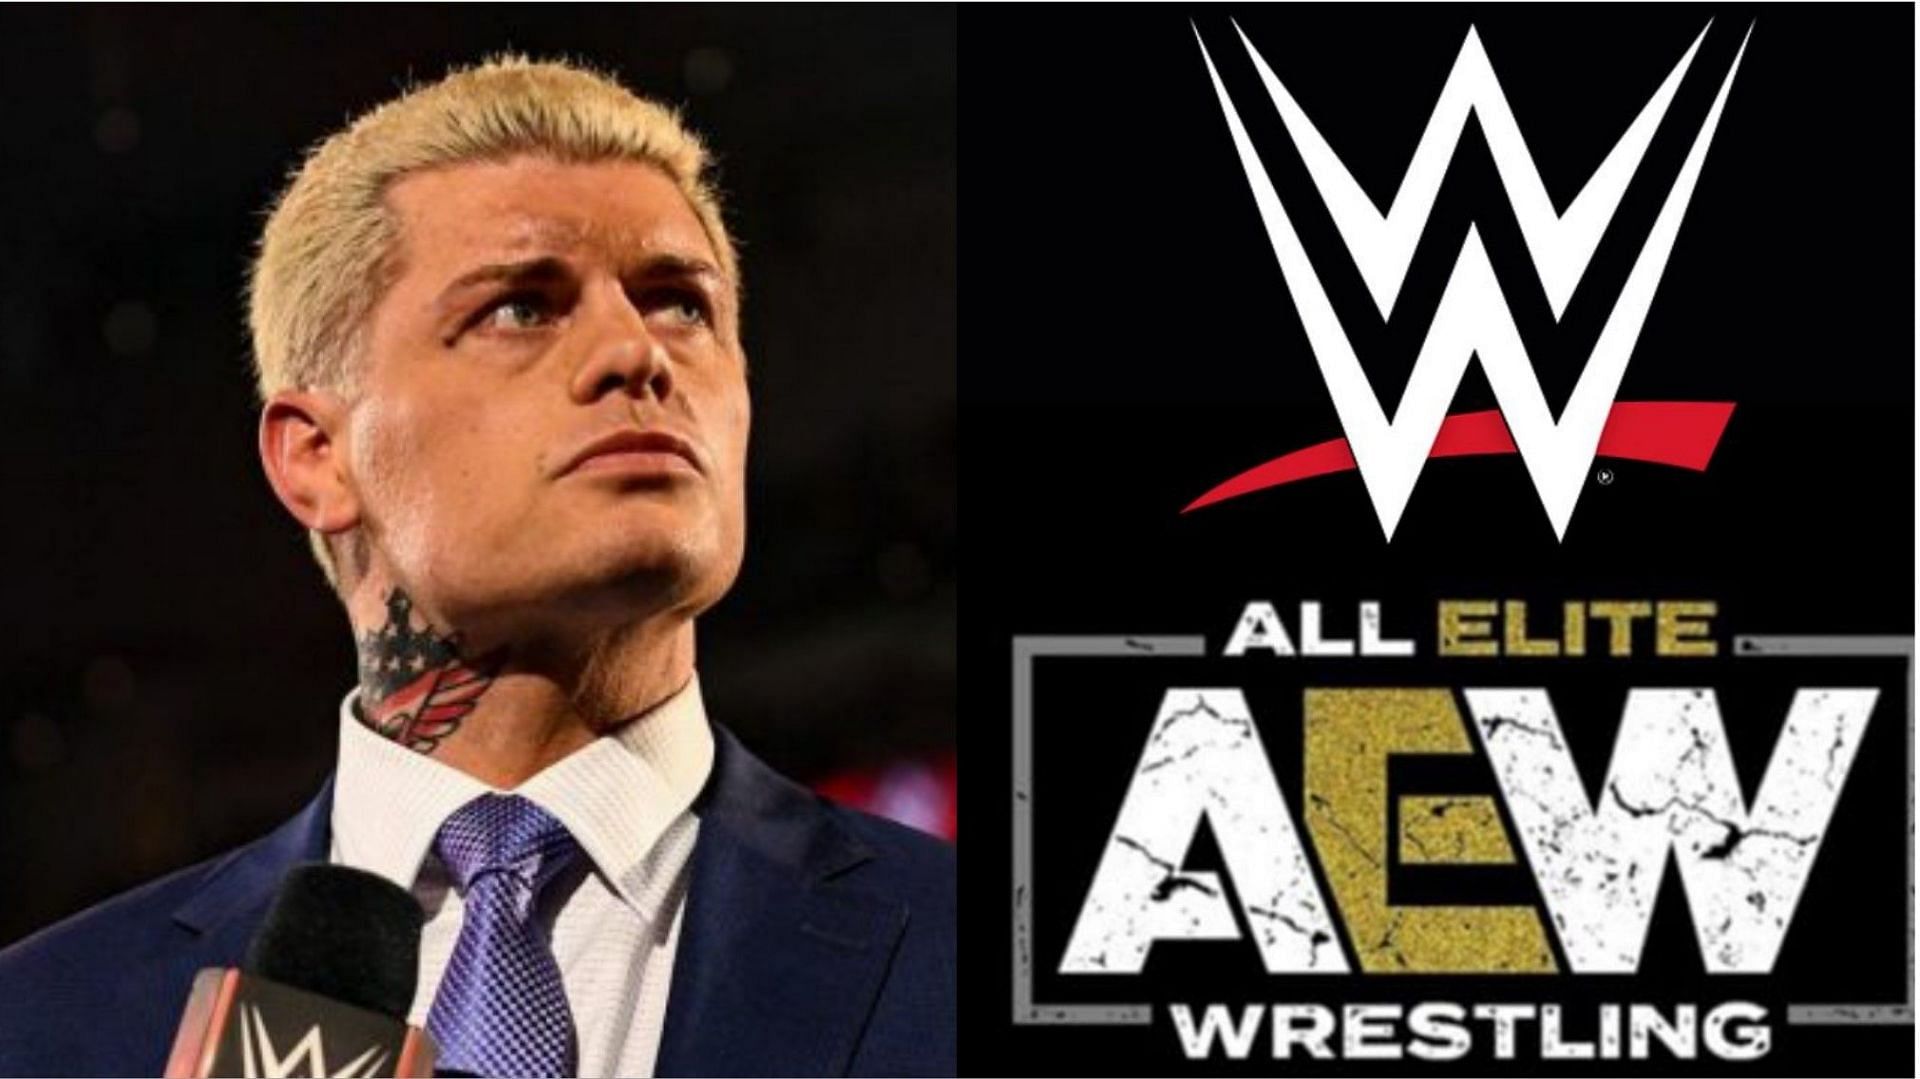 Cody Rhodes has made an impression on many up-and-coming stars.